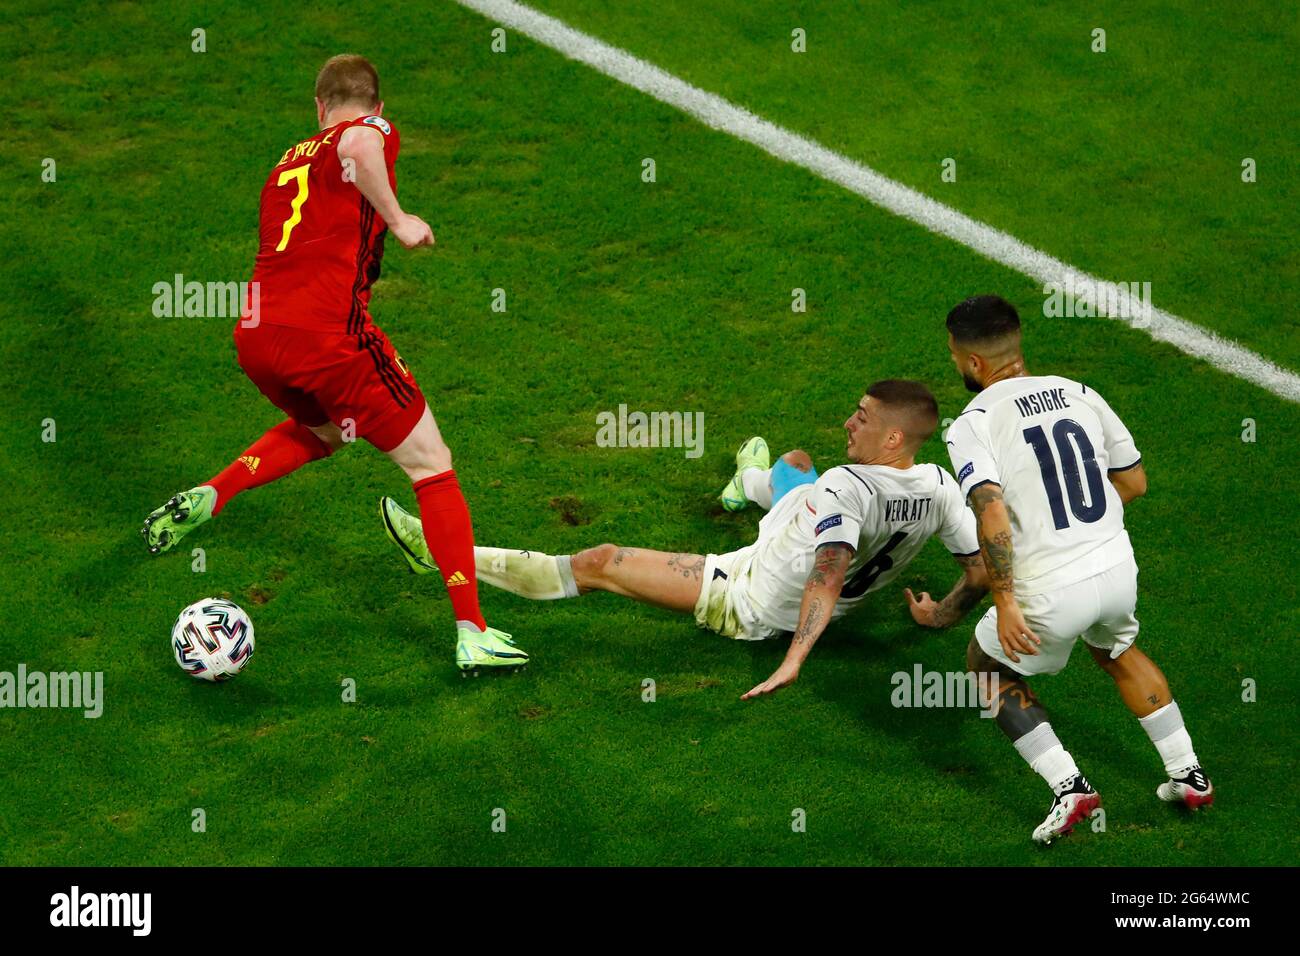 Munich, Germany. 02nd July, 2021. Kevin De Bruyne of Belgium, Marco Verratti and Lorenzo Insigne of Italy compete for the ball during the Uefa Euro 2020 round of 8 football match between Belgium and Italy at football arena in Munich (Germany), July 2nd, 2021. Photo Matteo Ciambelli/Insidefoto Credit: insidefoto srl/Alamy Live News Stock Photo